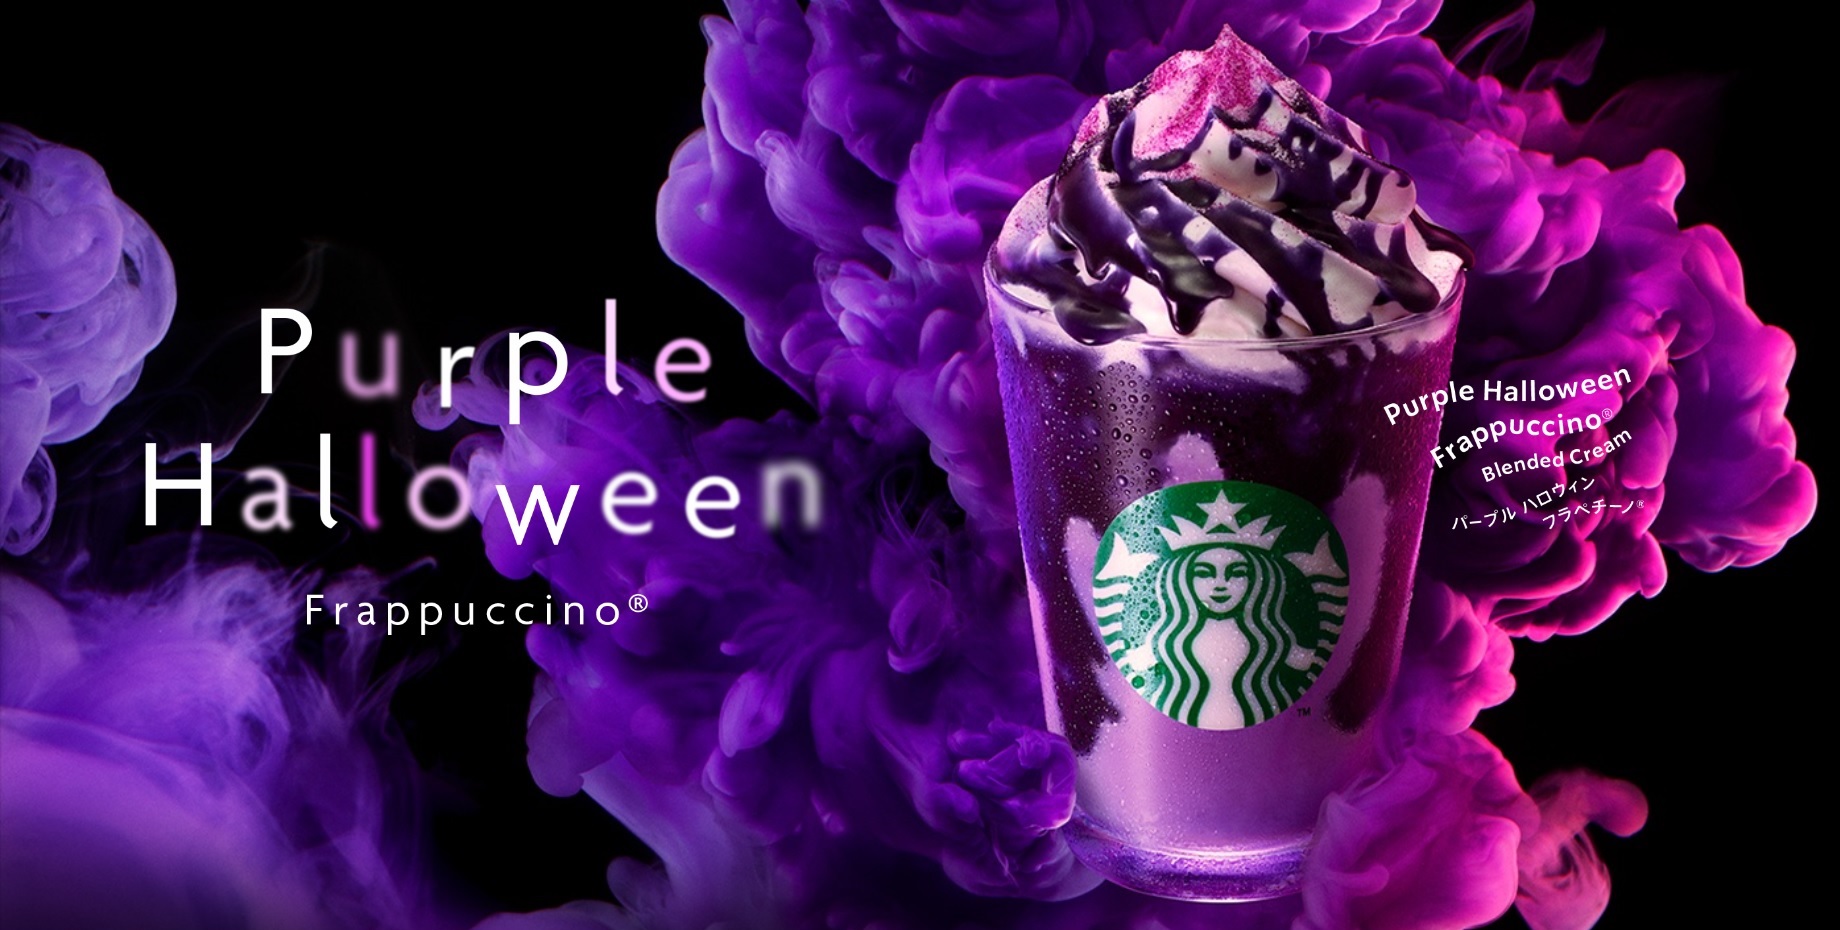 Starbucks Japan’s newest treats: the Purple Halloween Frappuccino and a gruesome-looking dessert